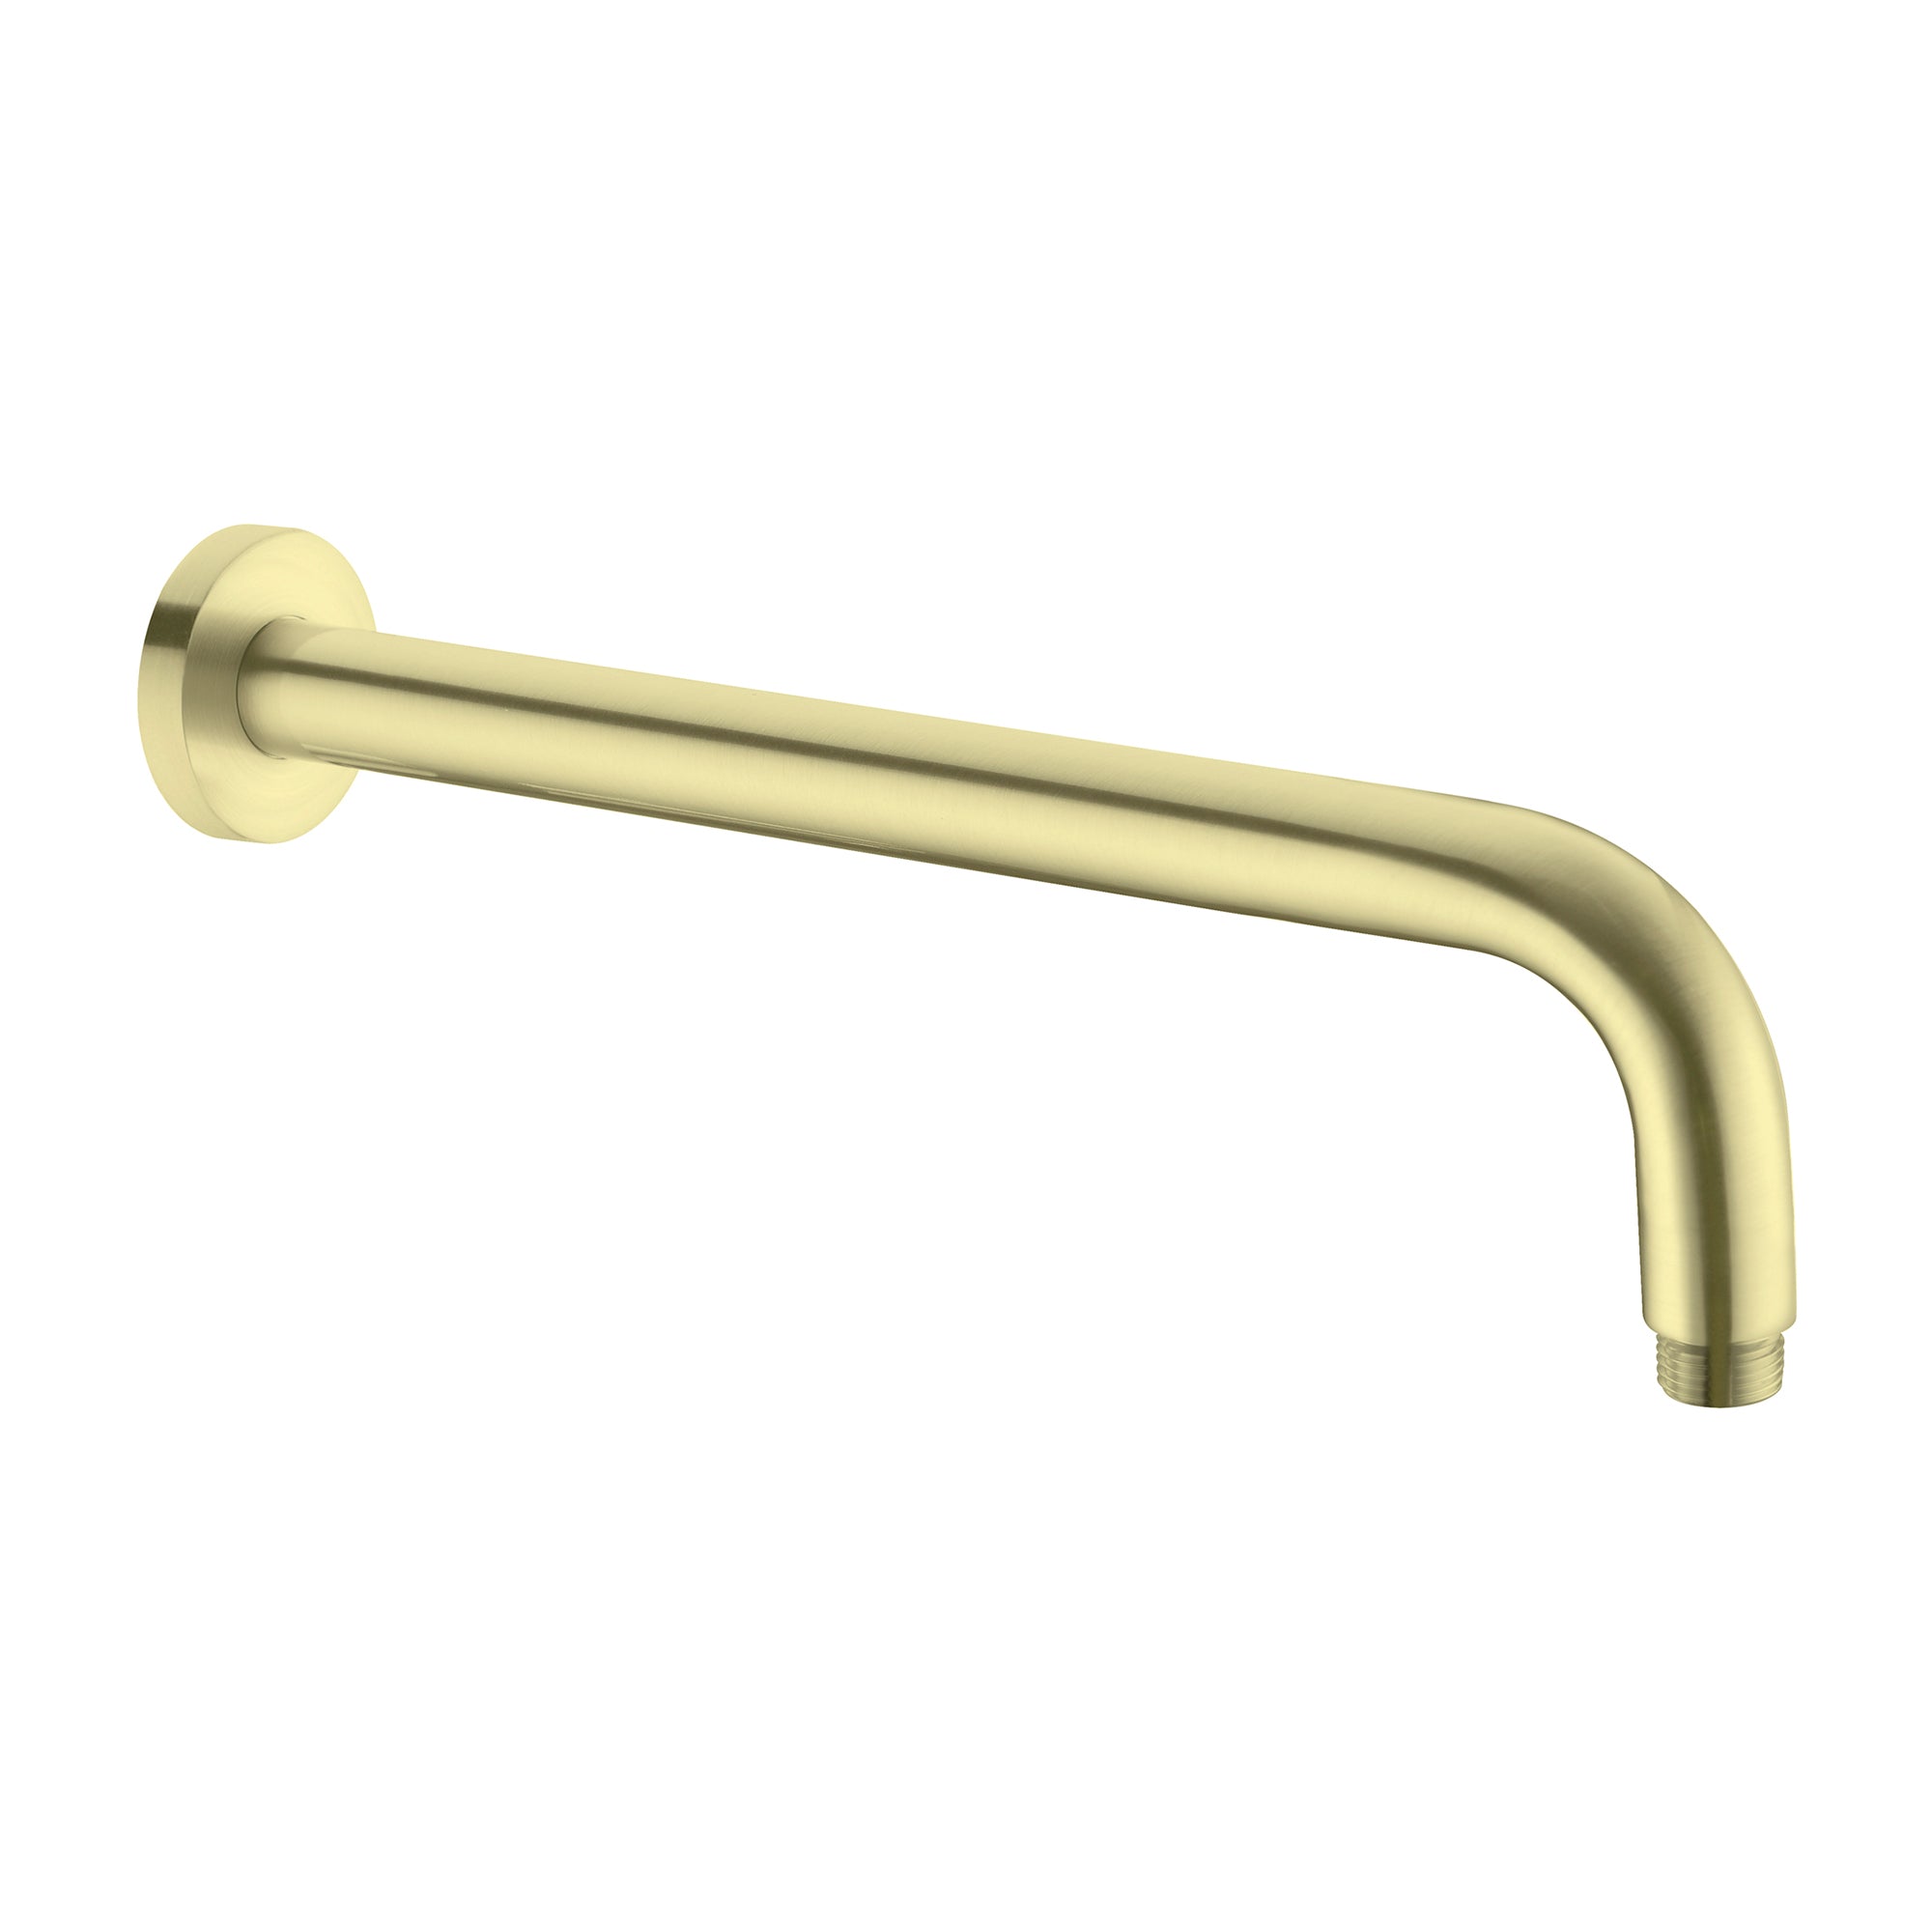 ROUND SHOWER ARM 330MM LENGTH BRUSHED GOLD